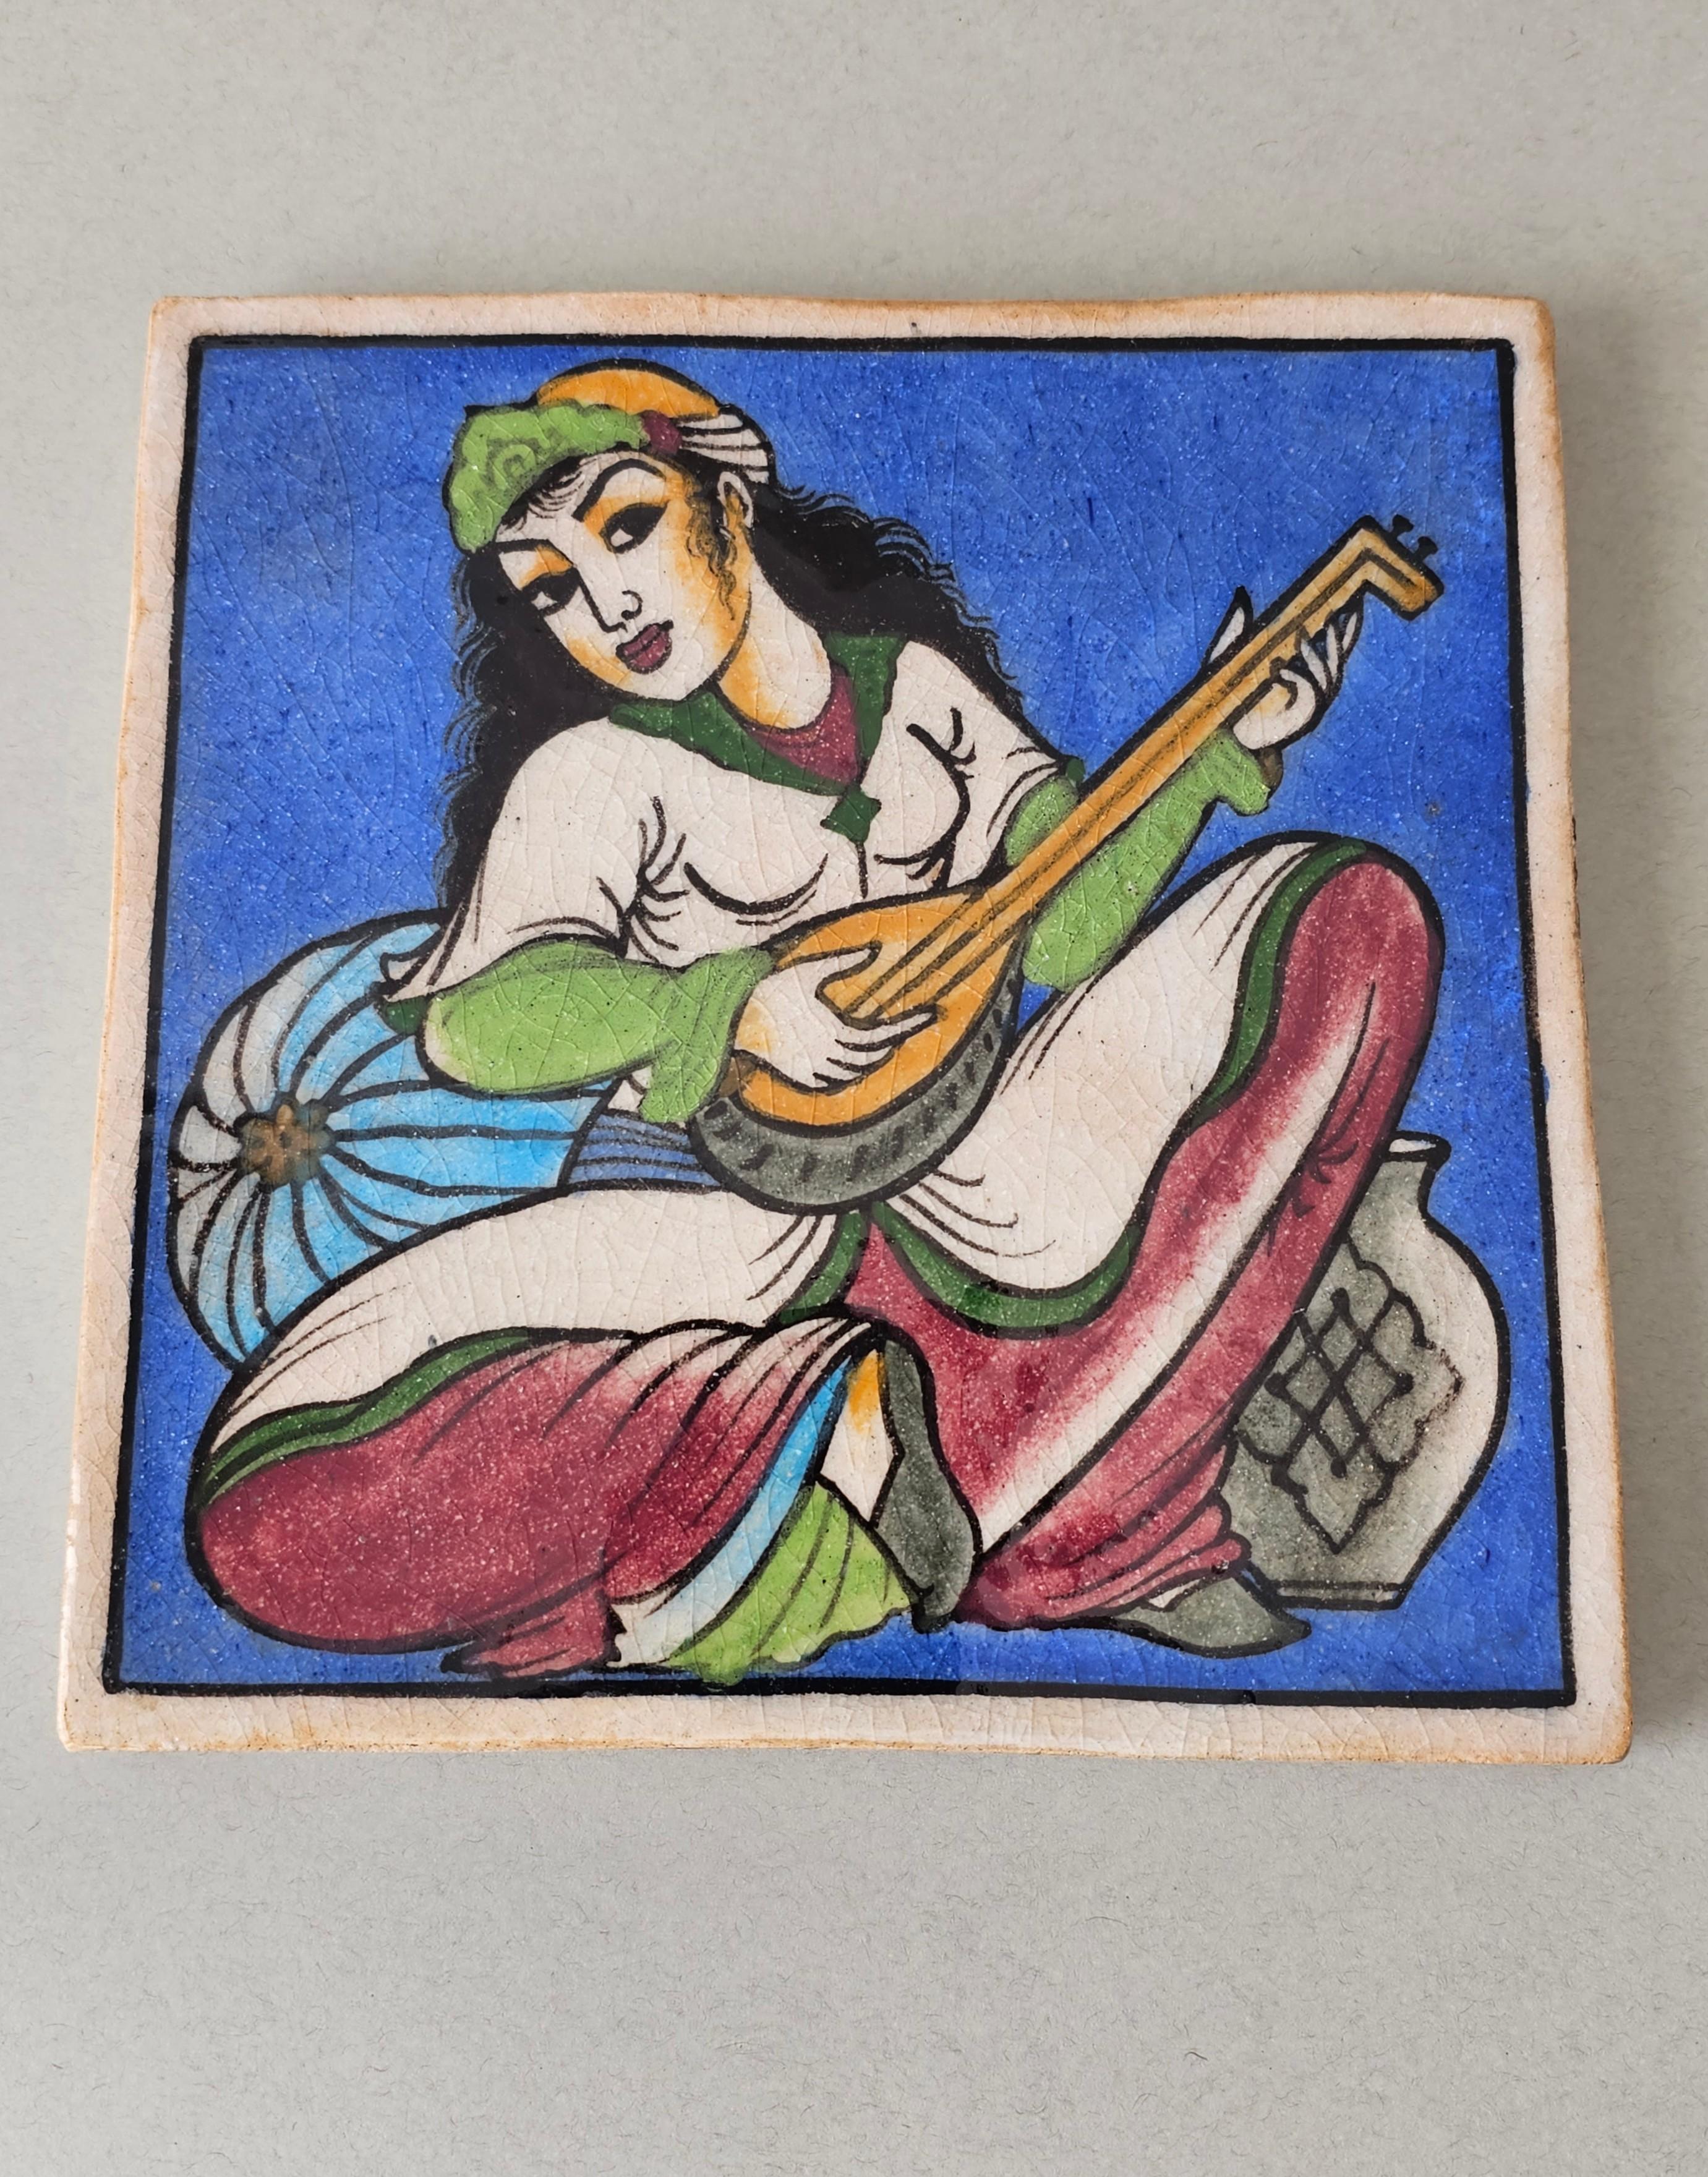 Indo-Persian Hand Painted Ceramic Wall Tile  For Sale 8